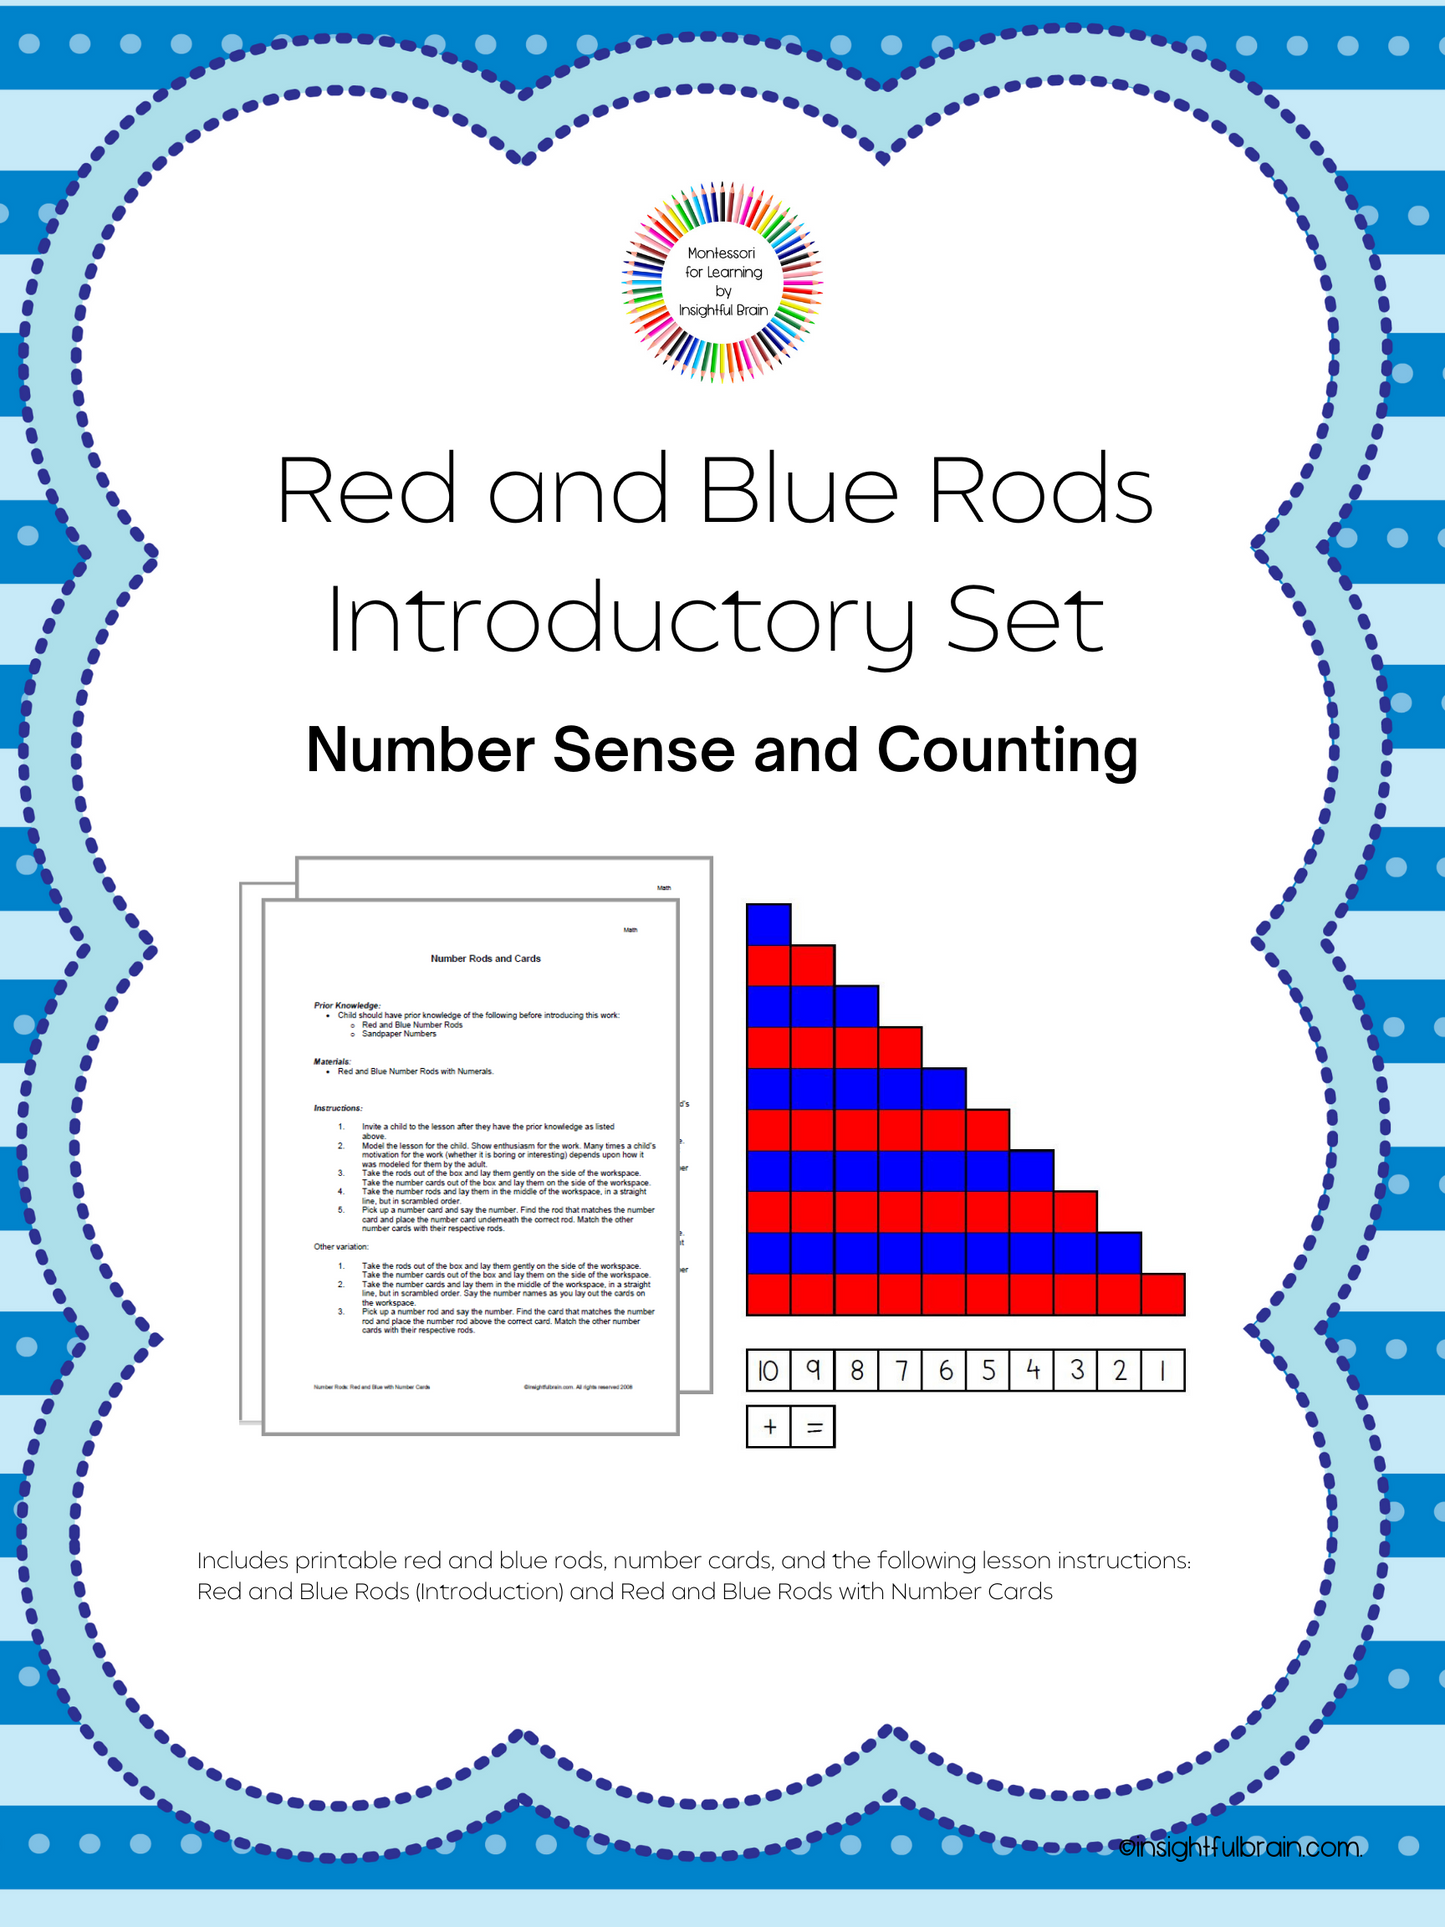 Red and Blue Rods Introductory Activity